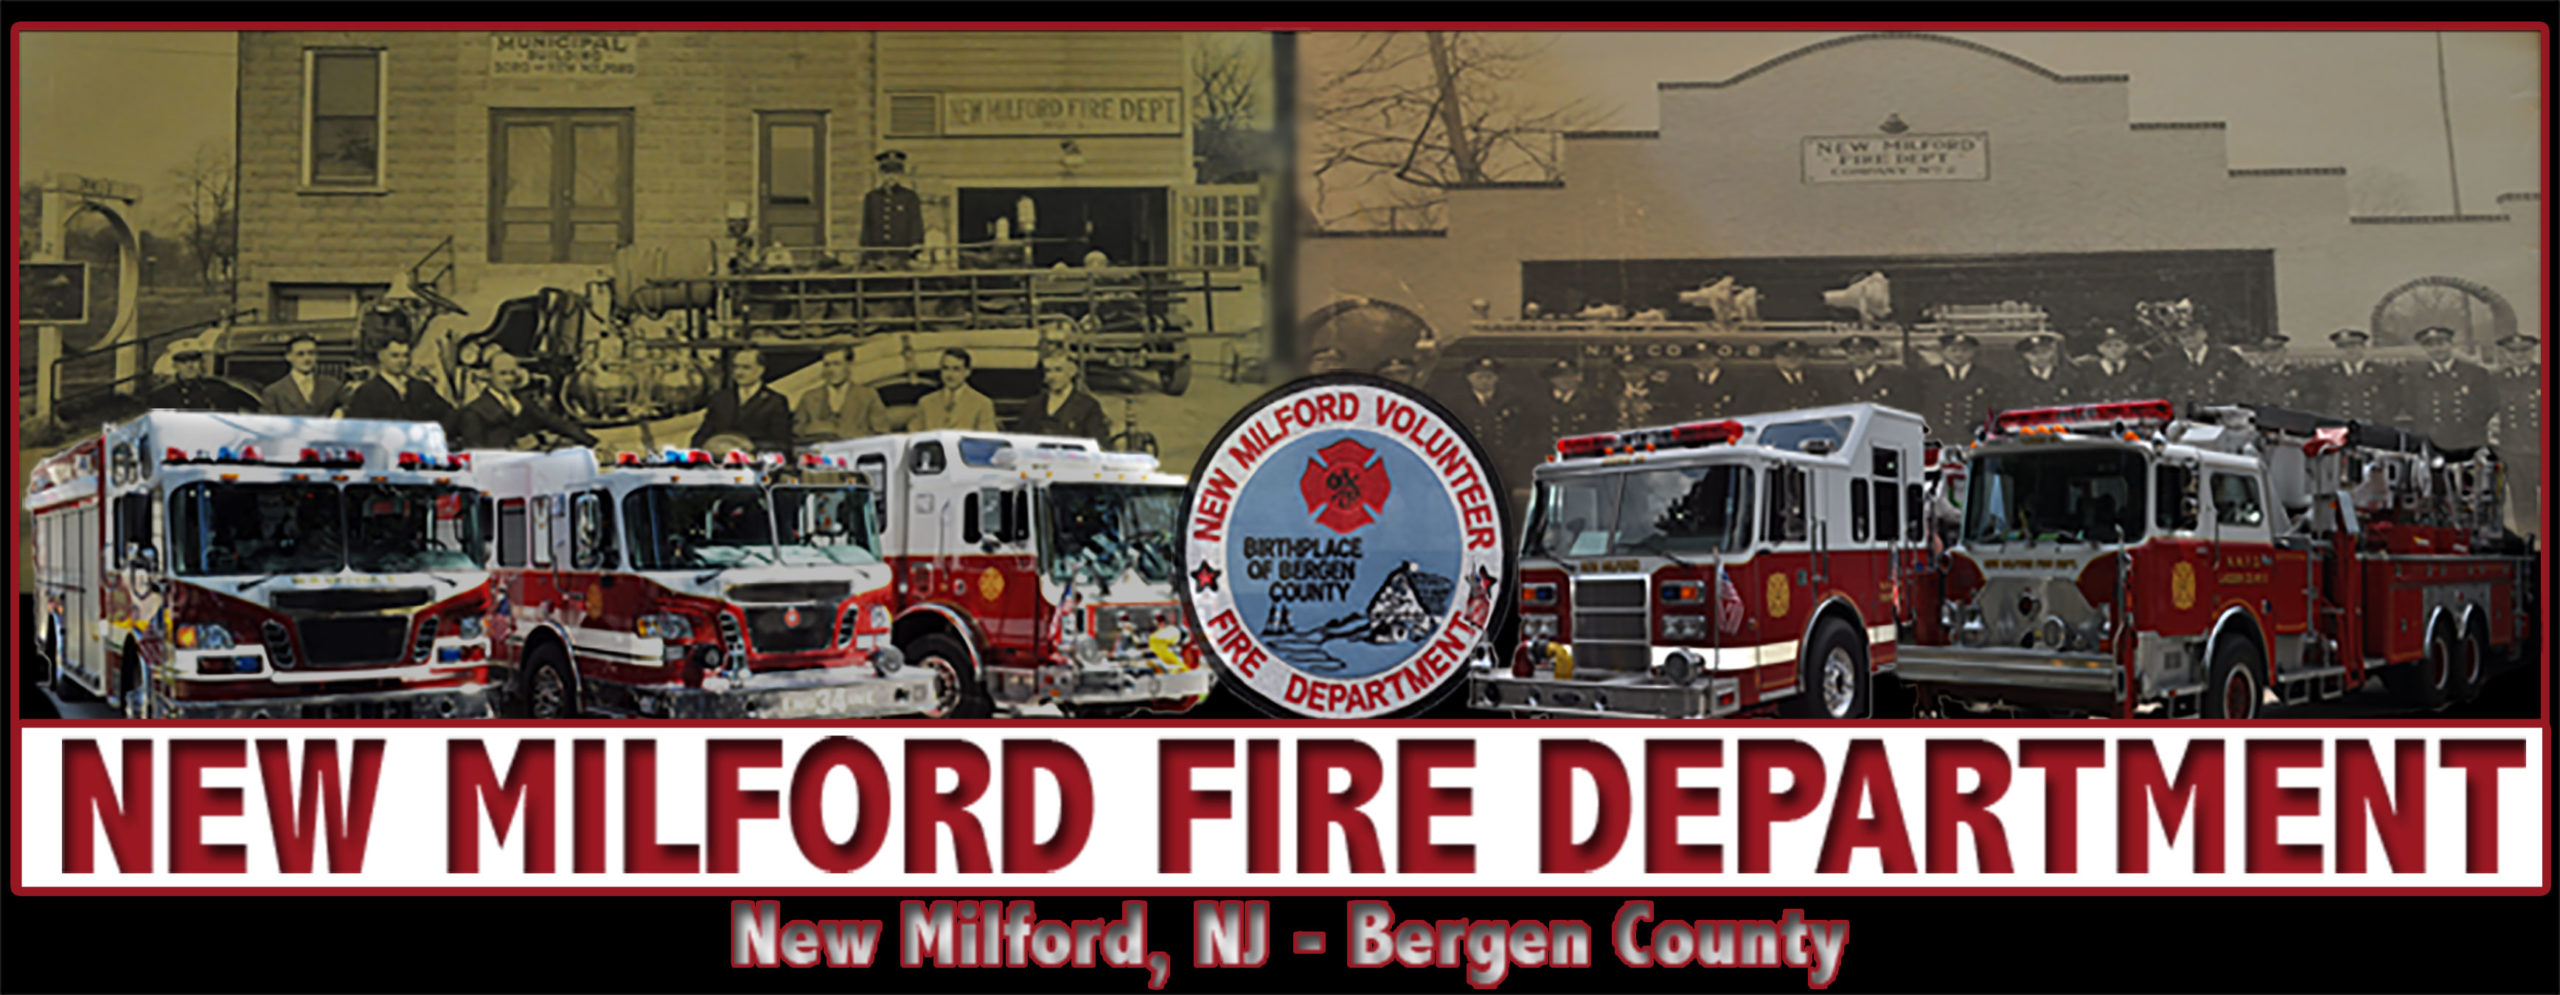 New Milford Fire Department